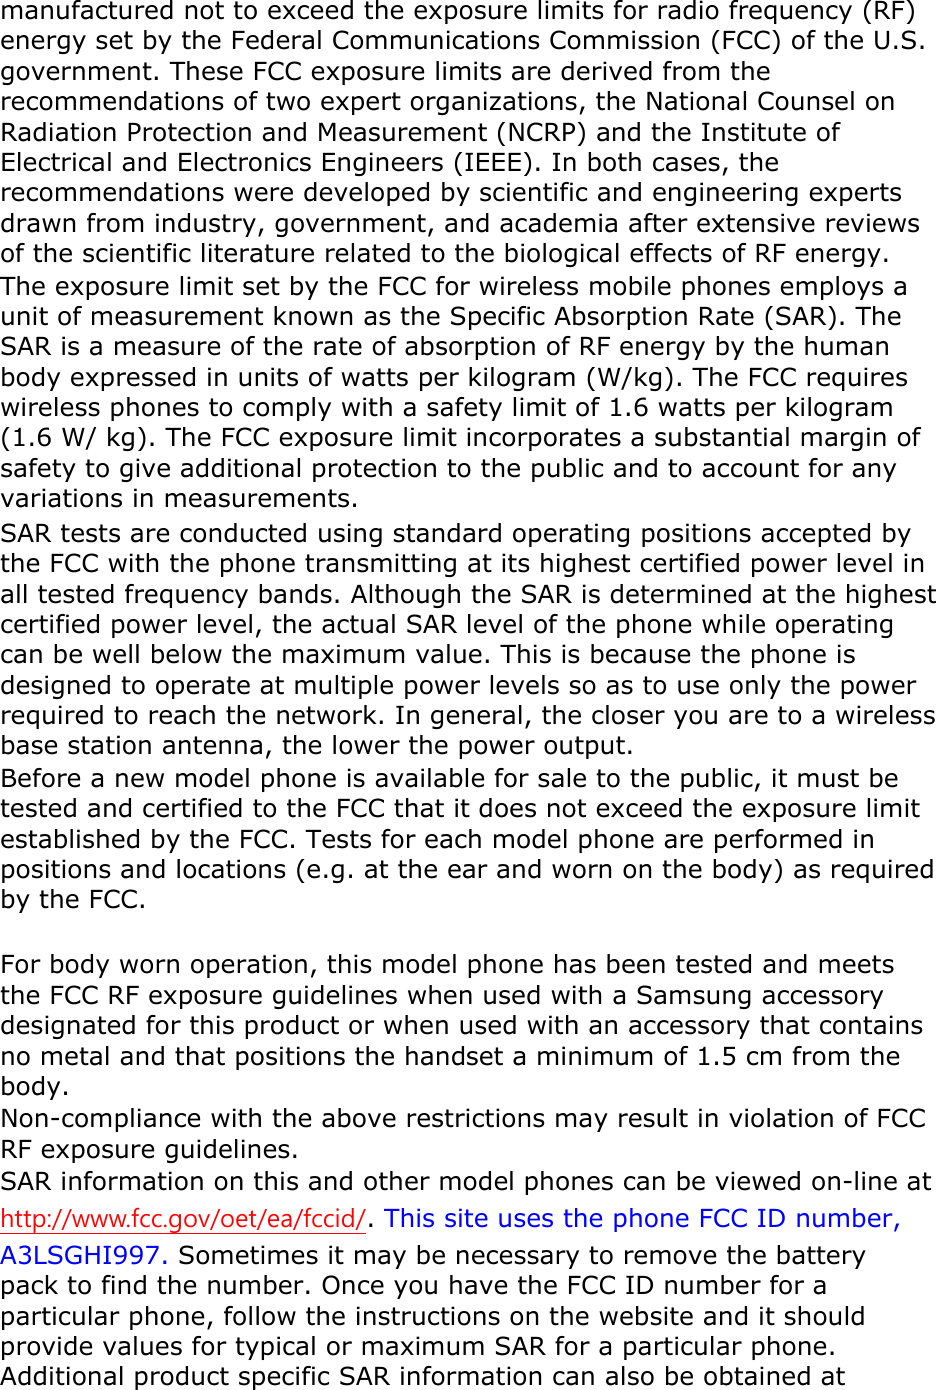 manufactured not to exceed the exposure limits for radio frequency (RF) energy set by the Federal Communications Commission (FCC) of the U.S. government. These FCC exposure limits are derived from the recommendations of two expert organizations, the National Counsel on Radiation Protection and Measurement (NCRP) and the Institute of Electrical and Electronics Engineers (IEEE). In both cases, the recommendations were developed by scientific and engineering experts drawn from industry, government, and academia after extensive reviews of the scientific literature related to the biological effects of RF energy. The exposure limit set by the FCC for wireless mobile phones employs a unit of measurement known as the Specific Absorption Rate (SAR). The SAR is a measure of the rate of absorption of RF energy by the human body expressed in units of watts per kilogram (W/kg). The FCC requires wireless phones to comply with a safety limit of 1.6 watts per kilogram (1.6 W/ kg). The FCC exposure limit incorporates a substantial margin of safety to give additional protection to the public and to account for any variations in measurements. SAR tests are conducted using standard operating positions accepted by the FCC with the phone transmitting at its highest certified power level in all tested frequency bands. Although the SAR is determined at the highest certified power level, the actual SAR level of the phone while operating can be well below the maximum value. This is because the phone is designed to operate at multiple power levels so as to use only the power required to reach the network. In general, the closer you are to a wireless base station antenna, the lower the power output. Before a new model phone is available for sale to the public, it must be tested and certified to the FCC that it does not exceed the exposure limit established by the FCC. Tests for each model phone are performed in positions and locations (e.g. at the ear and worn on the body) as required by the FCC.      For body worn operation, this model phone has been tested and meets the FCC RF exposure guidelines when used with a Samsung accessory designated for this product or when used with an accessory that contains no metal and that positions the handset a minimum of 1.5 cm from the body.  Non-compliance with the above restrictions may result in violation of FCC RF exposure guidelines. SAR information on this and other model phones can be viewed on-line at http://www.fcc.gov/oet/ea/fccid/. This site uses the phone FCC ID number, A3LSGHI997. Sometimes it may be necessary to remove the battery pack to find the number. Once you have the FCC ID number for a particular phone, follow the instructions on the website and it should provide values for typical or maximum SAR for a particular phone. Additional product specific SAR information can also be obtained at 